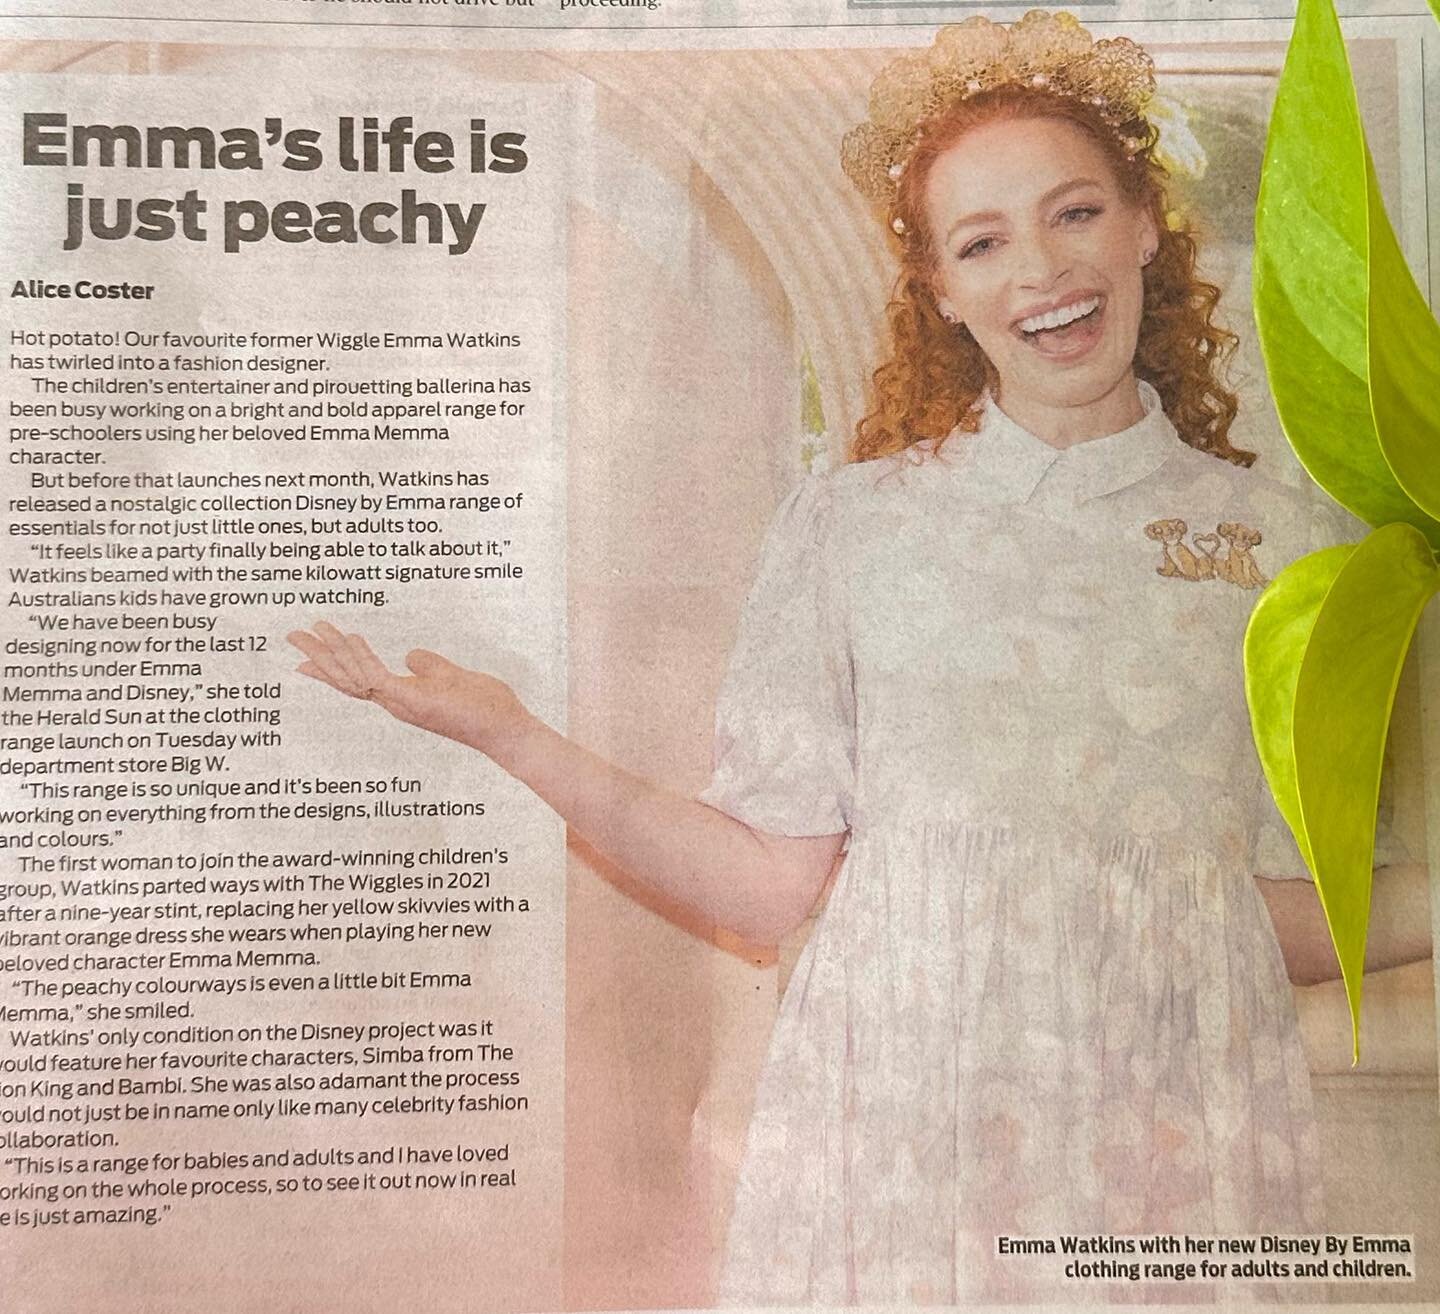 Loving the coverage today in the Herald Sun ✨